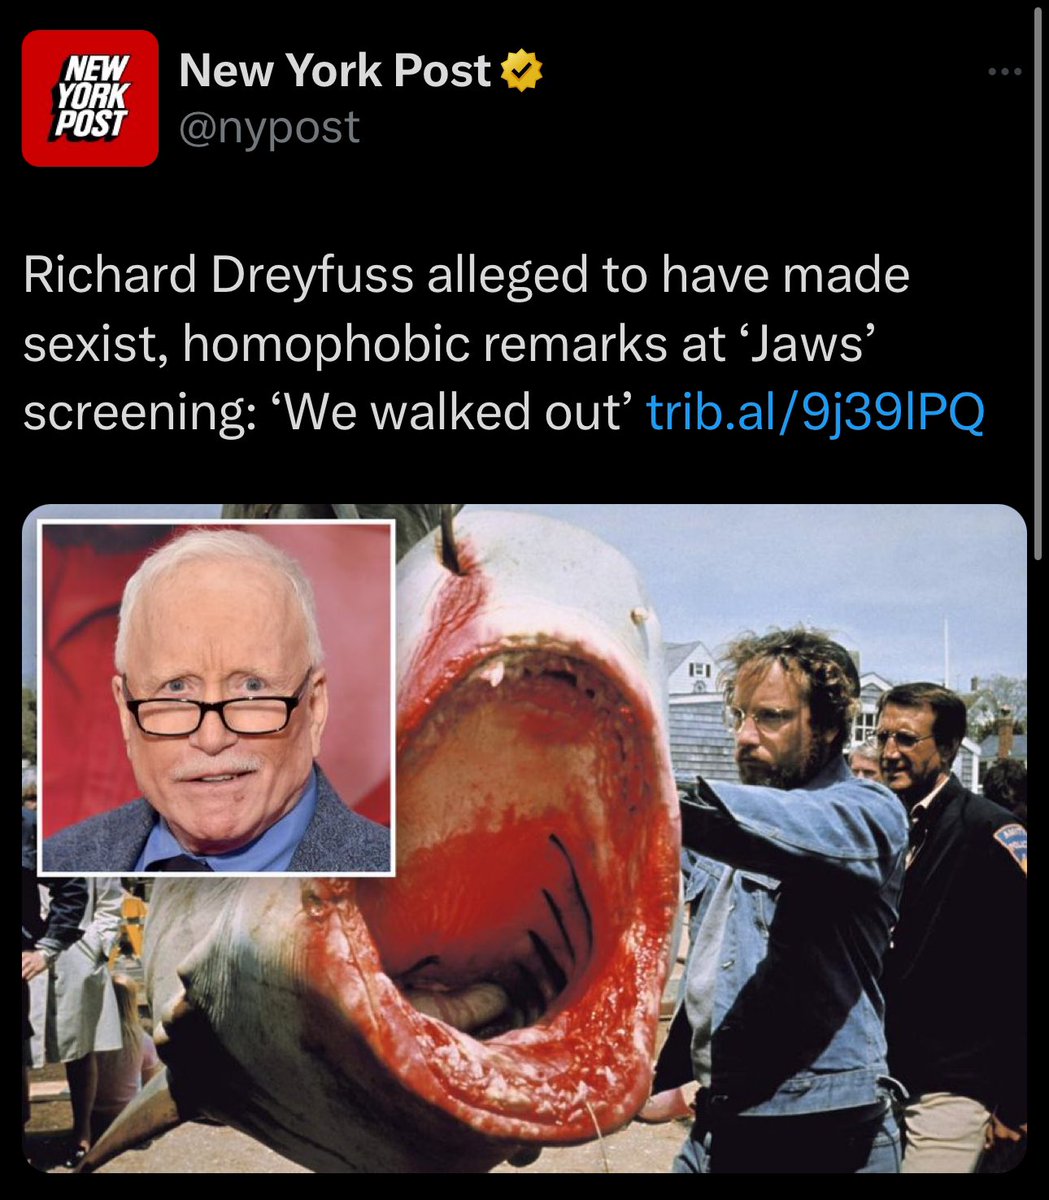 Protect Richard Dreyfuss at all costs. They’re trying to cancel him.